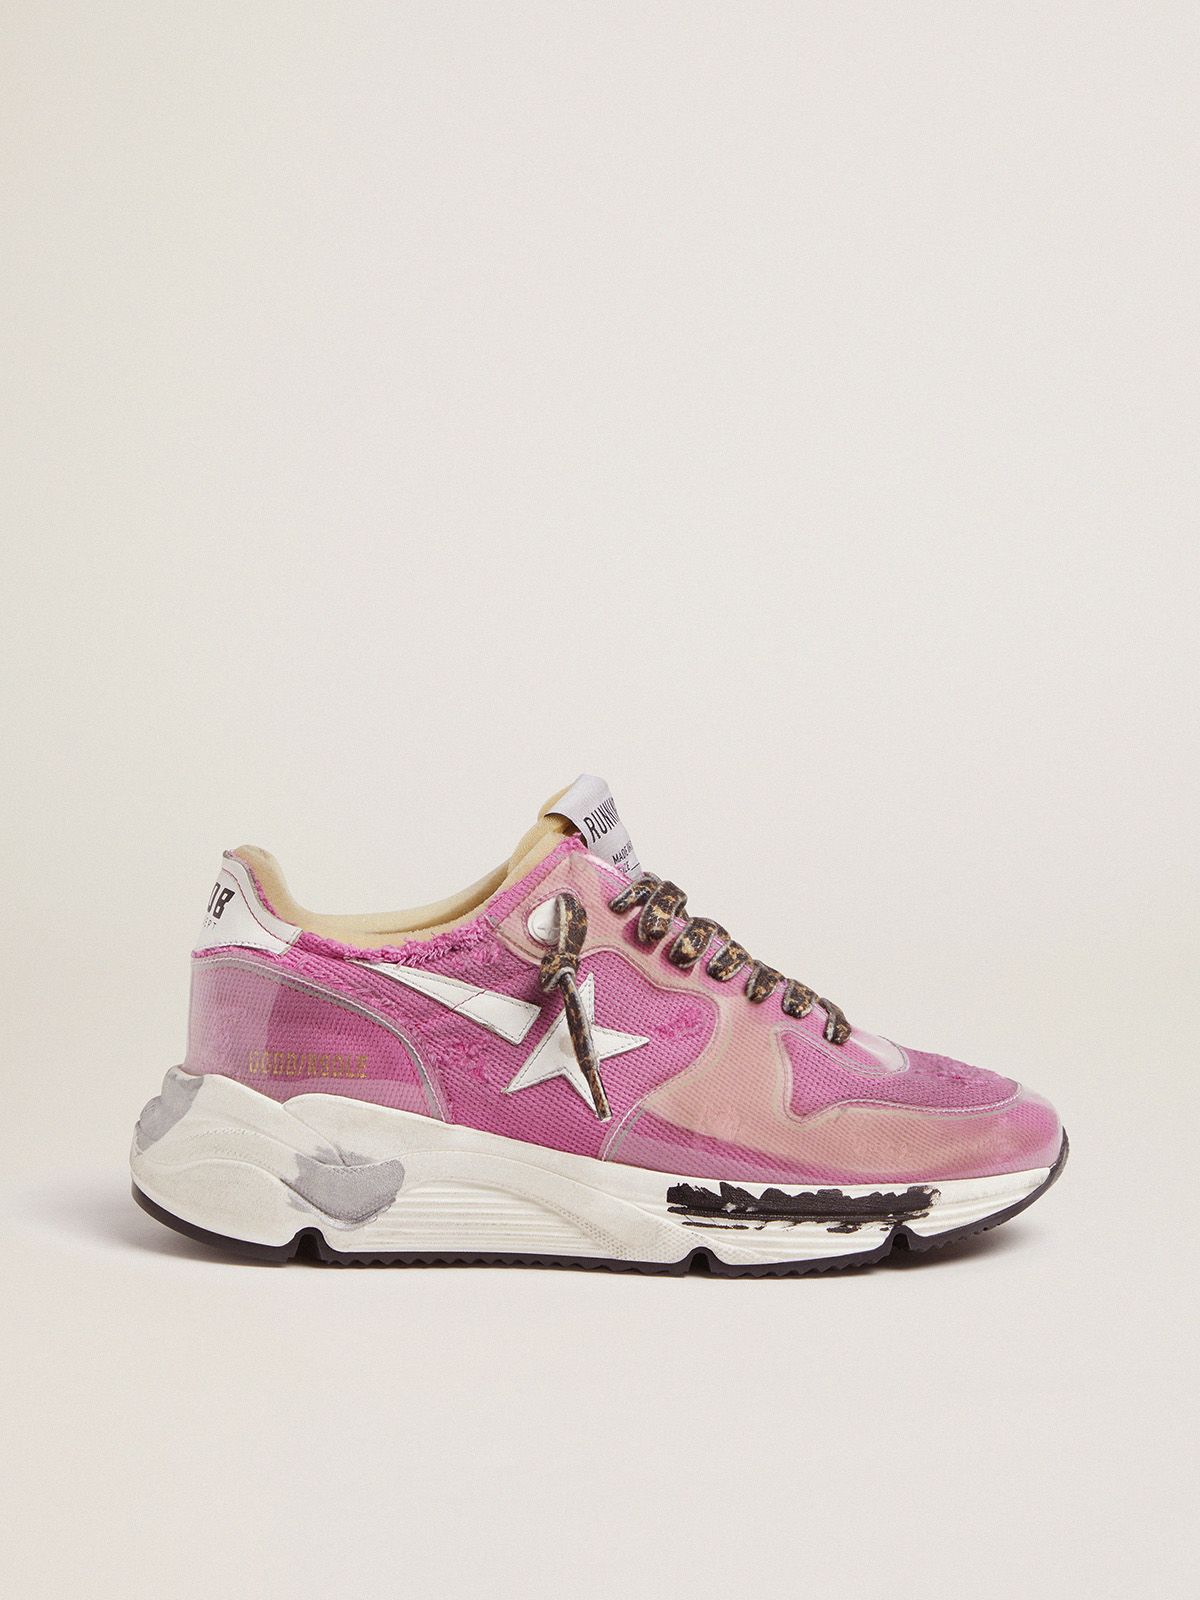 golden goose edges LTD Running Sole with raw sneakers Fuchsia